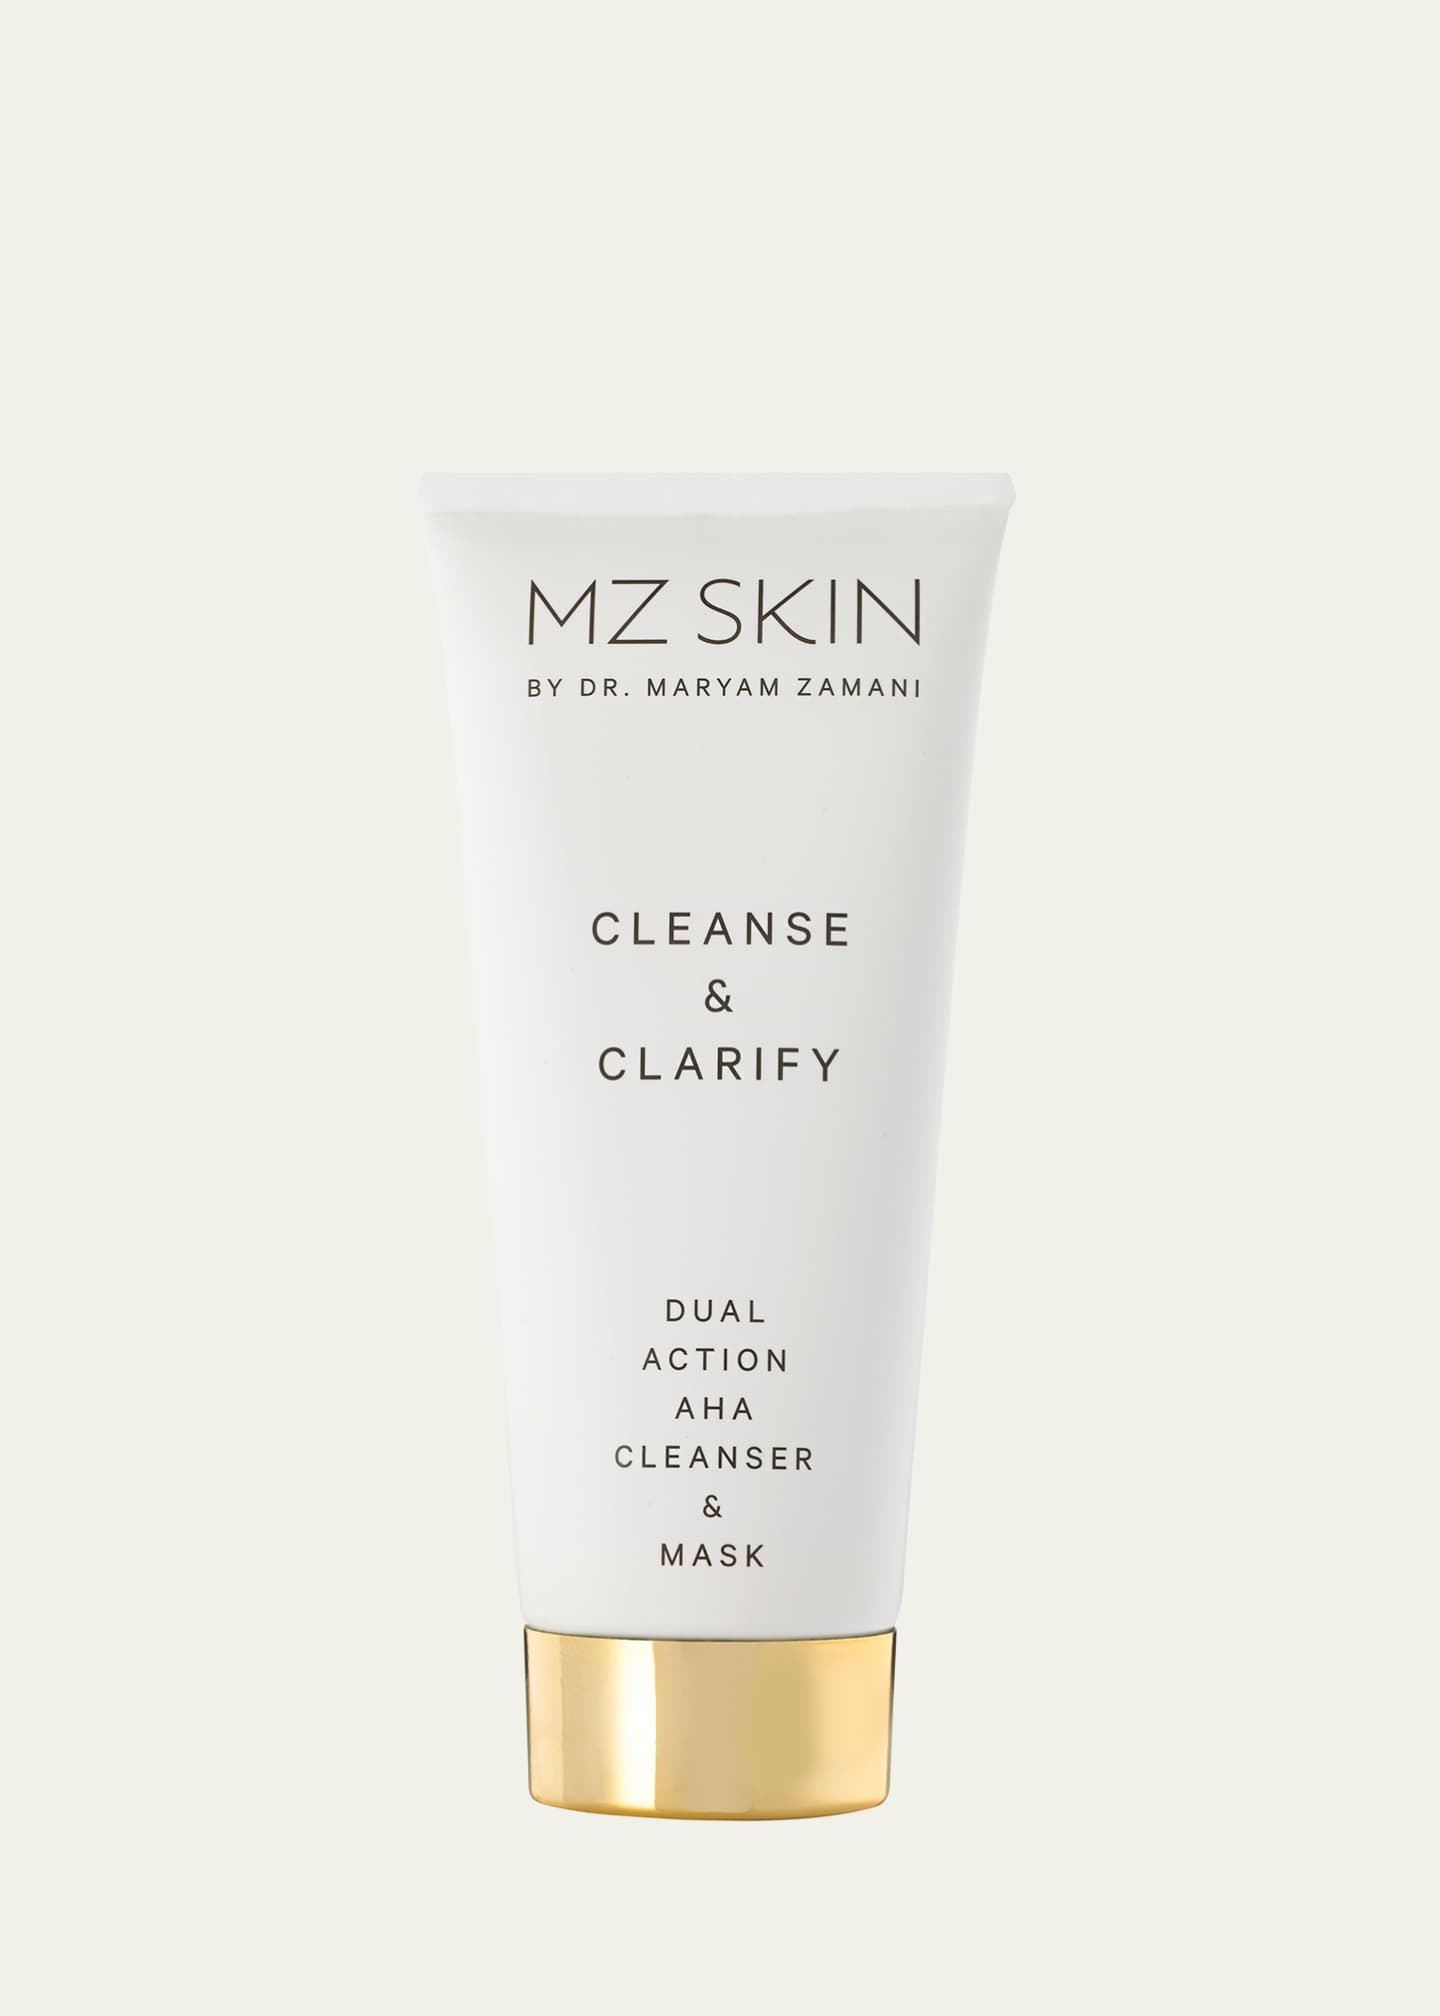 MZ Skin Cleanse and Clarify Dual Action AHA Cleanser and Mask, 3.4 oz. Image 1 of 4